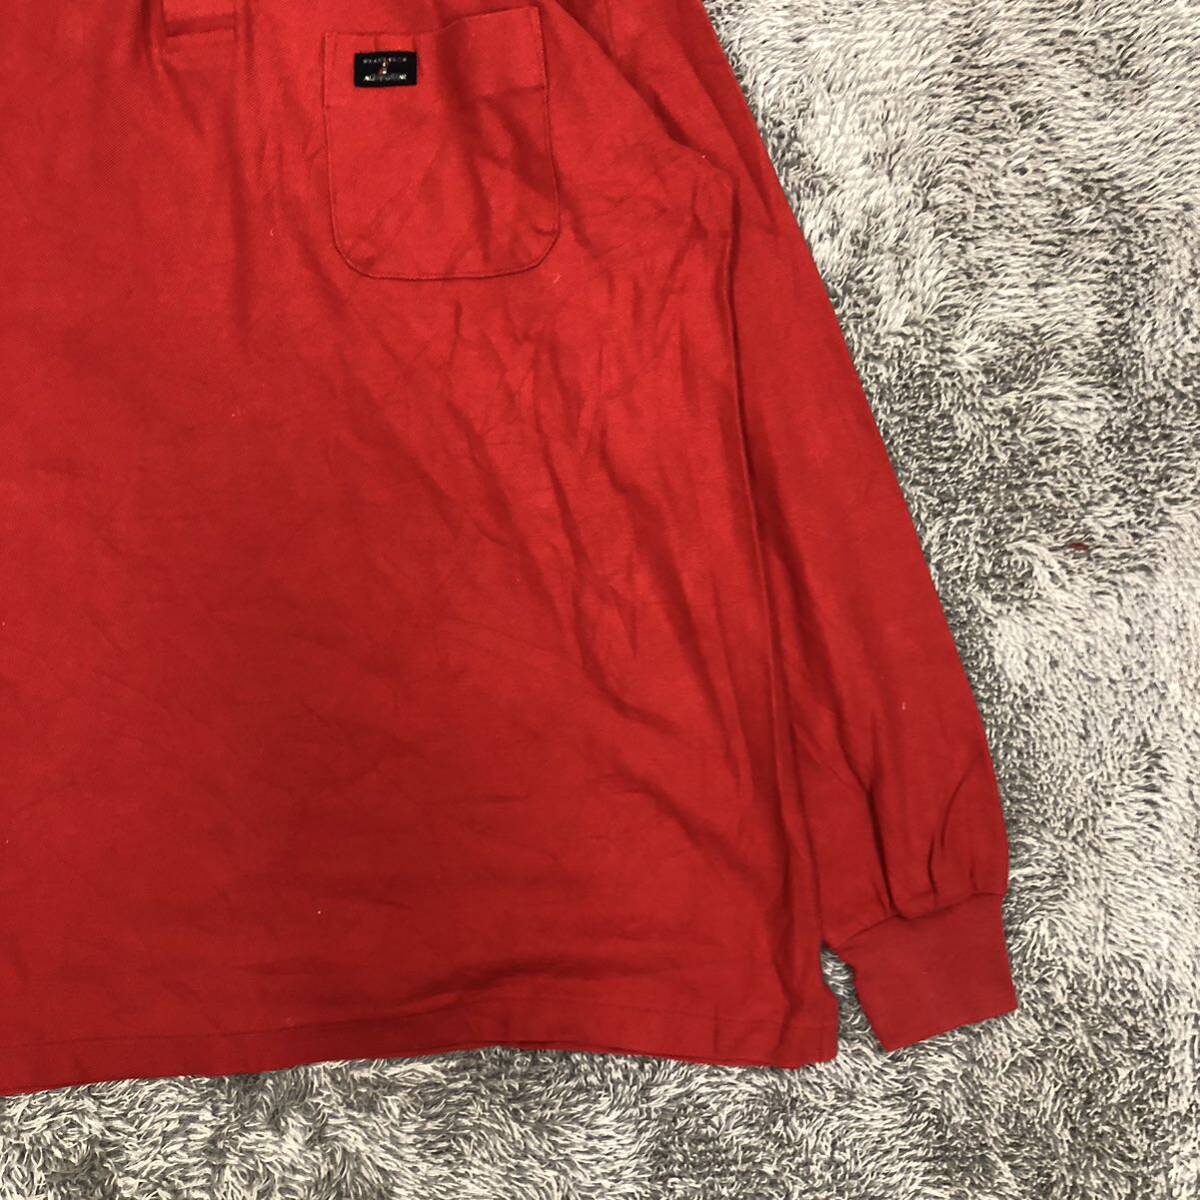 Munsingwear Munsingwear wear polo-shirt with long sleeves size MA deer . deer. . red red one Point plain men's tops there is no highest bid (V17)